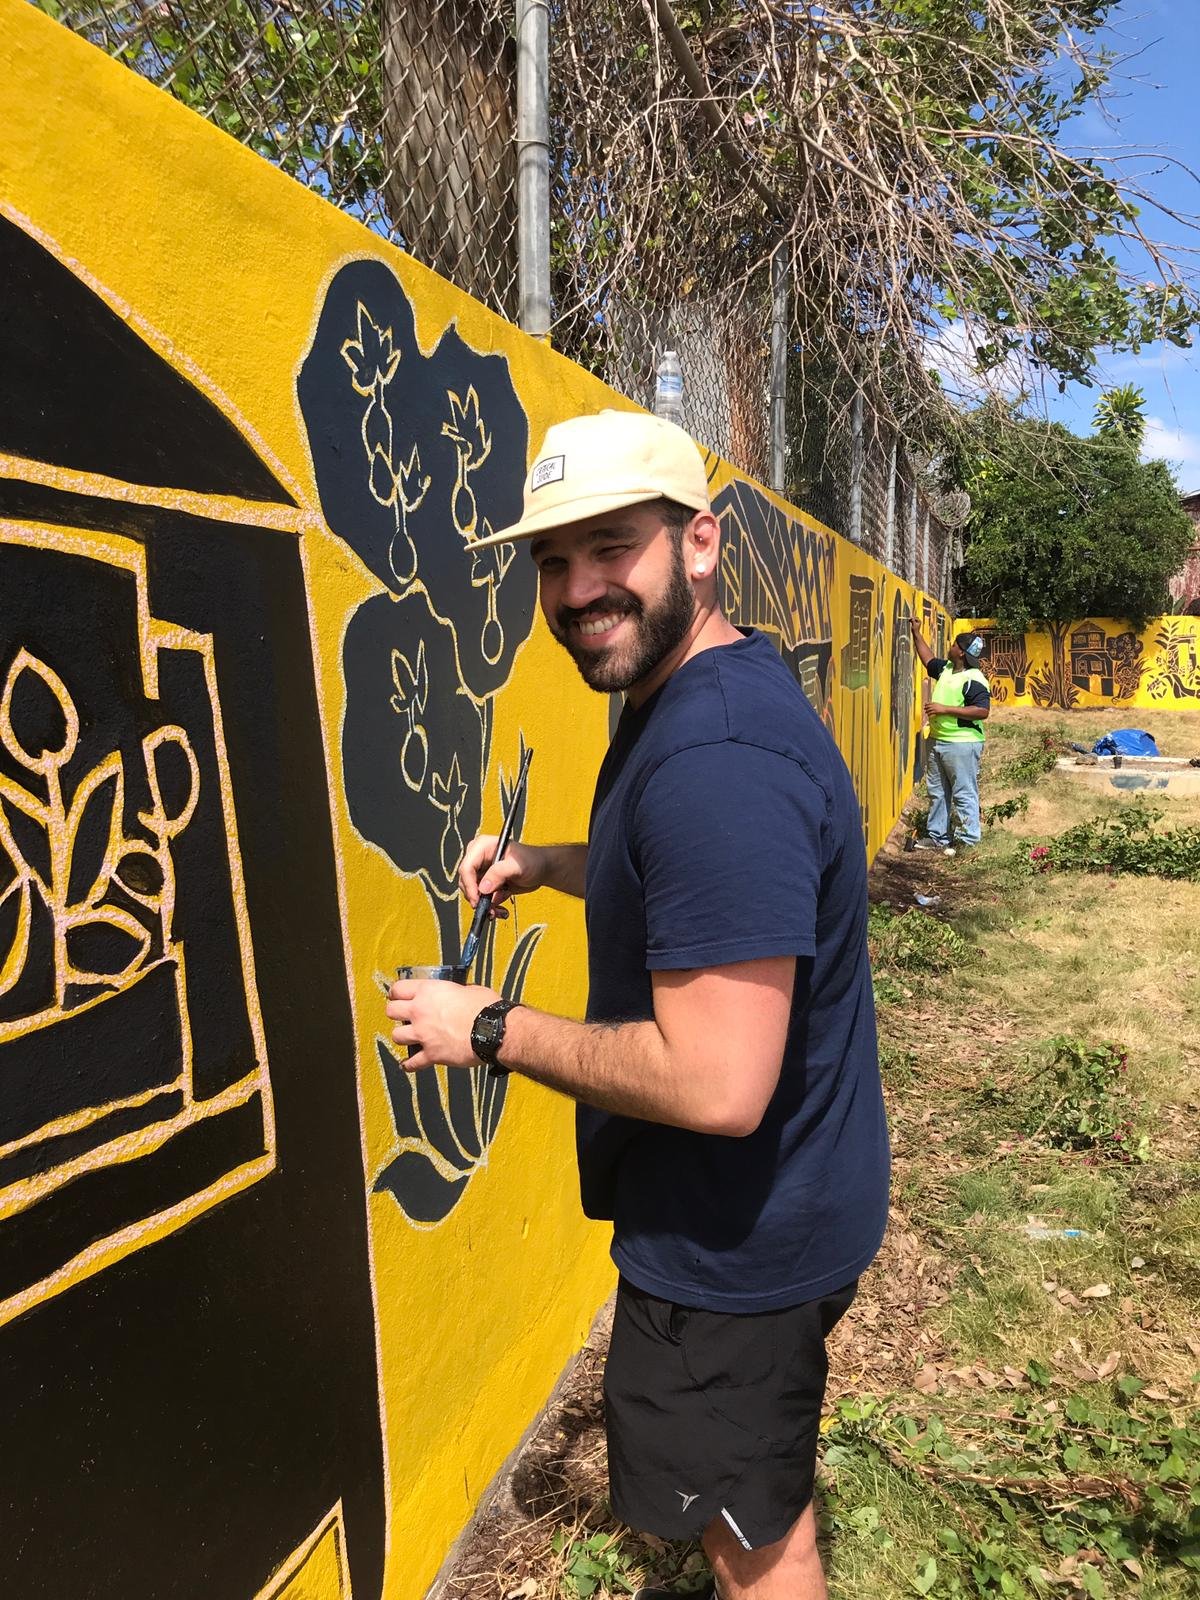  AD&amp;v team member posing for picture while painting mural 